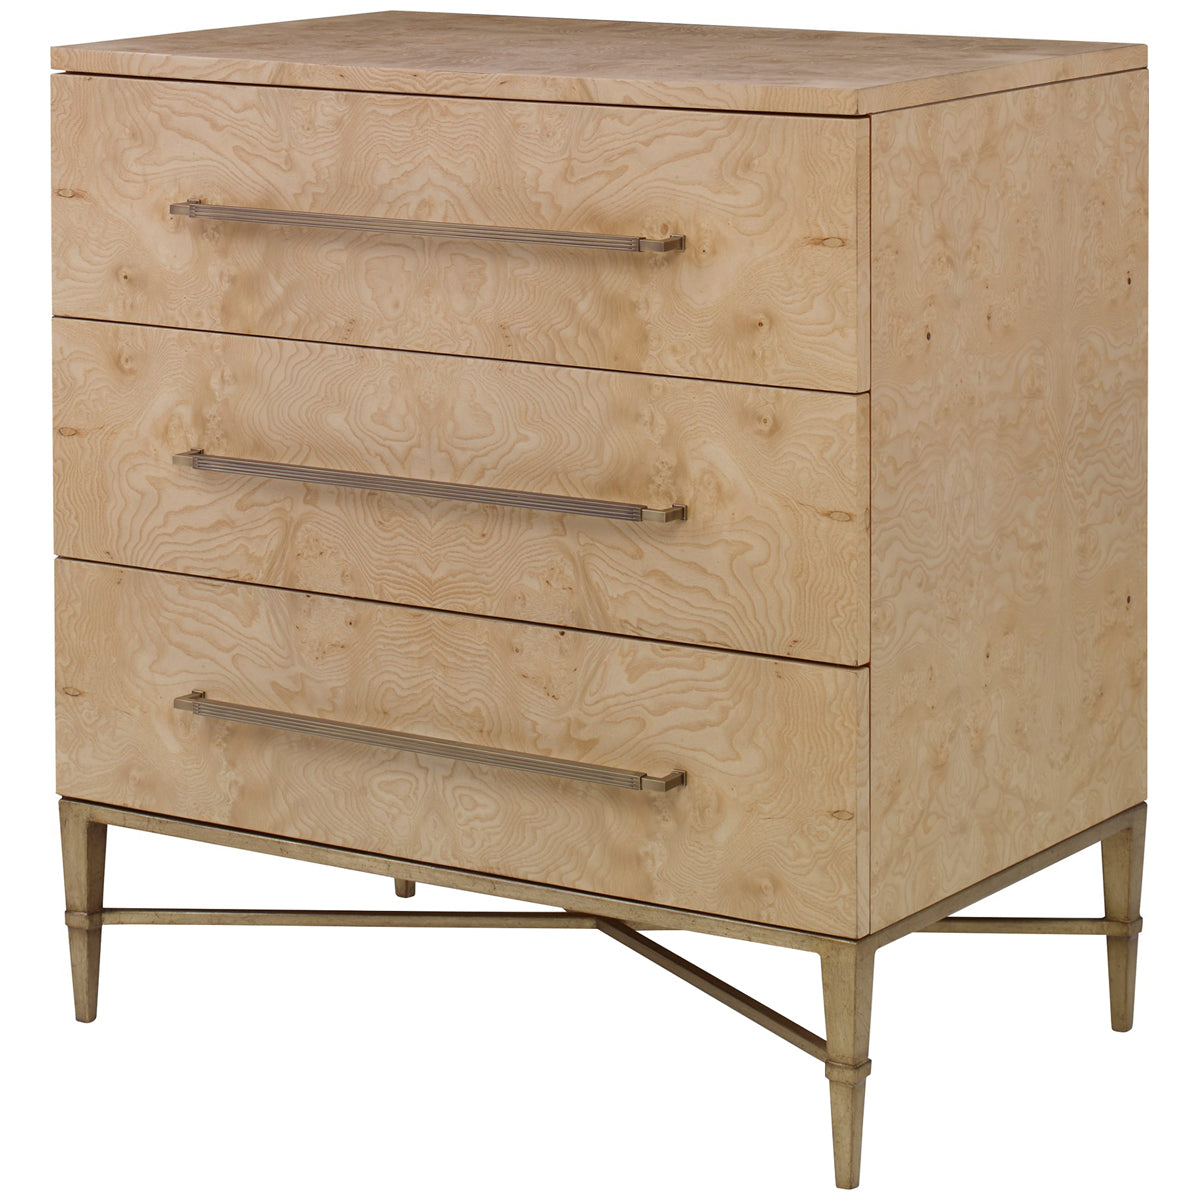 Ambella Home Ardel Chest - Clear Coat